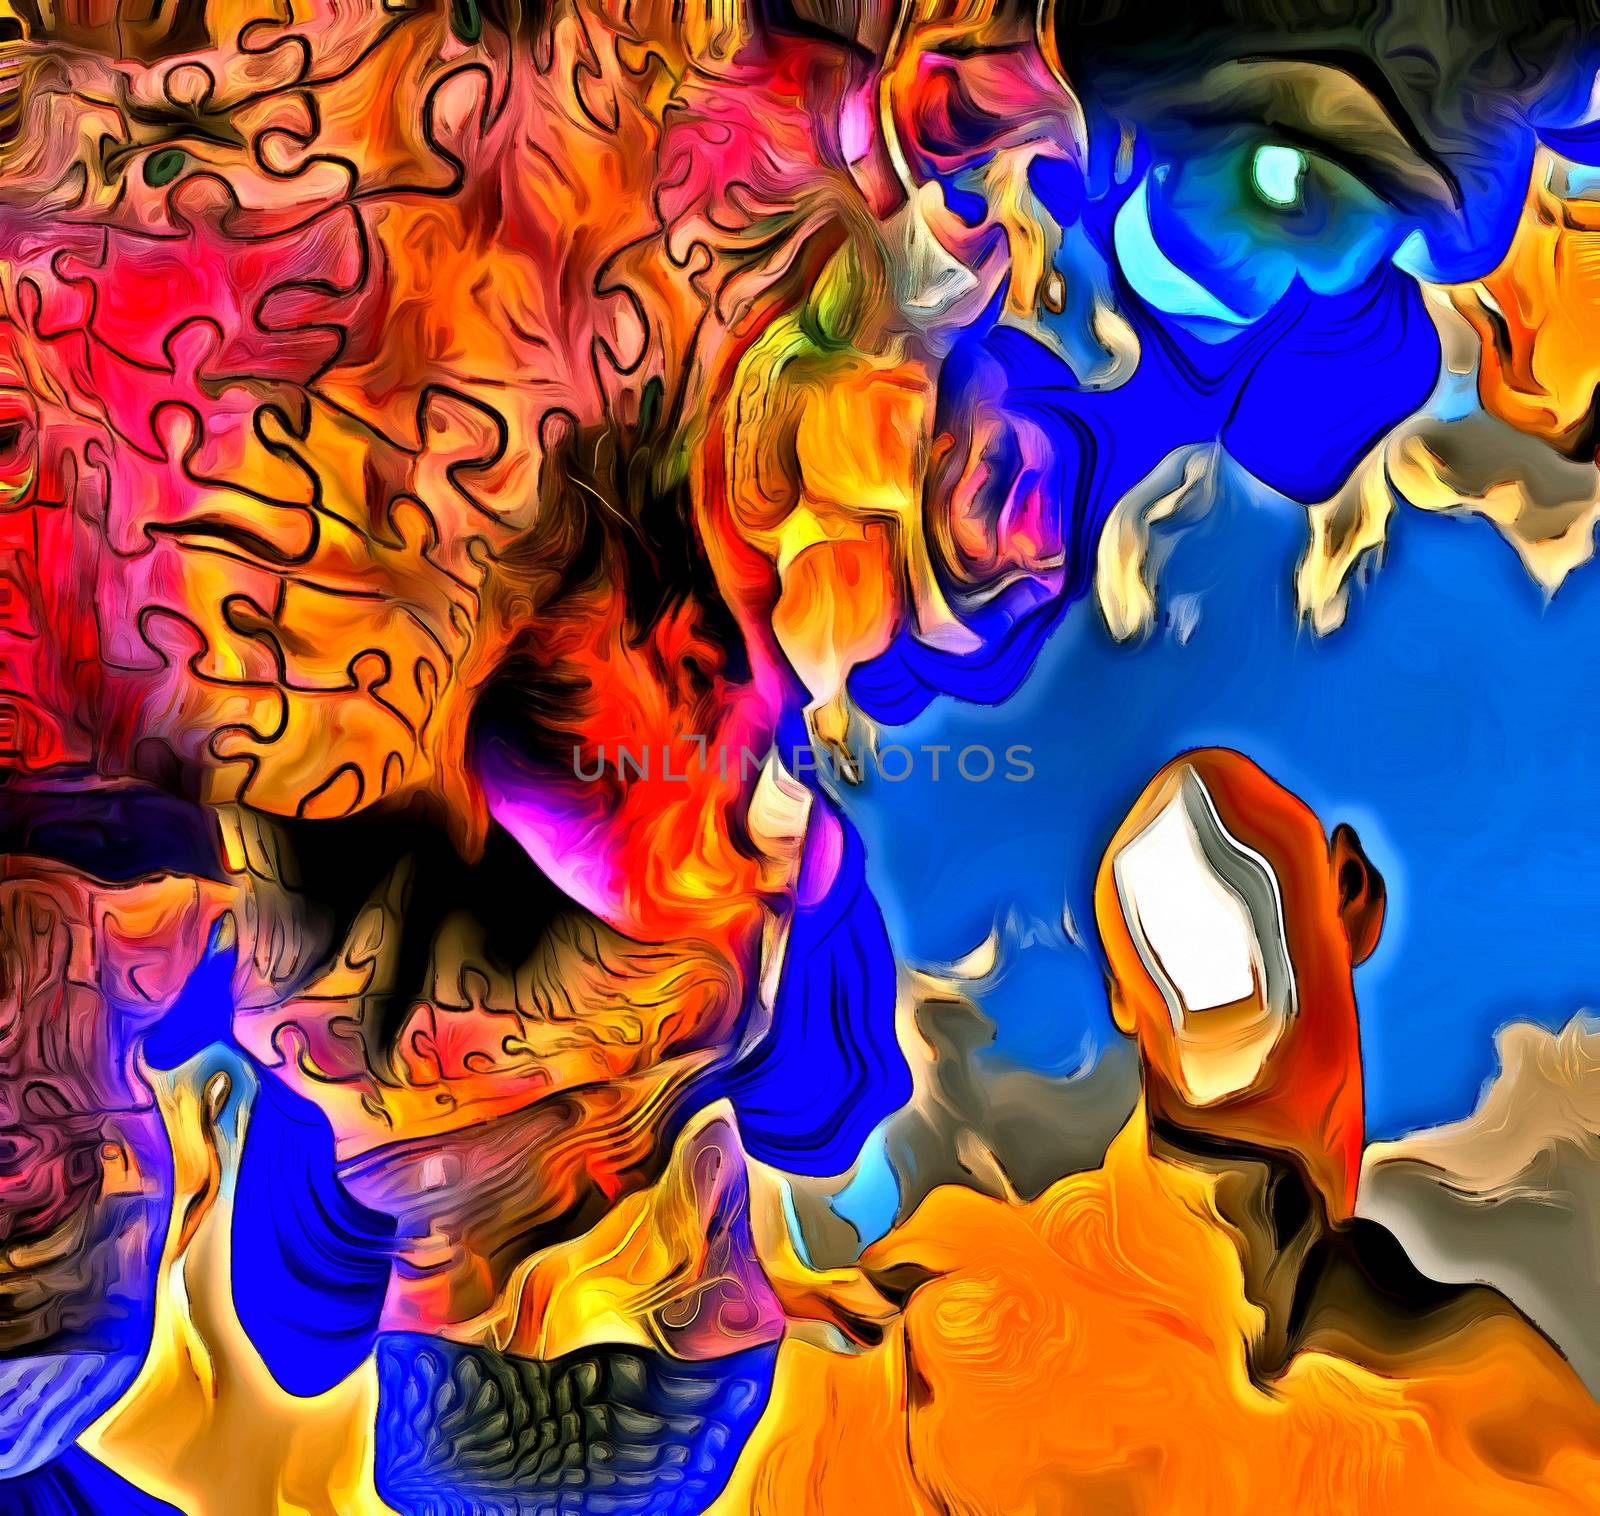 Surreal painting. Man with open door instead of face. Melting dimensions and puzzle pattern. Eye of God.